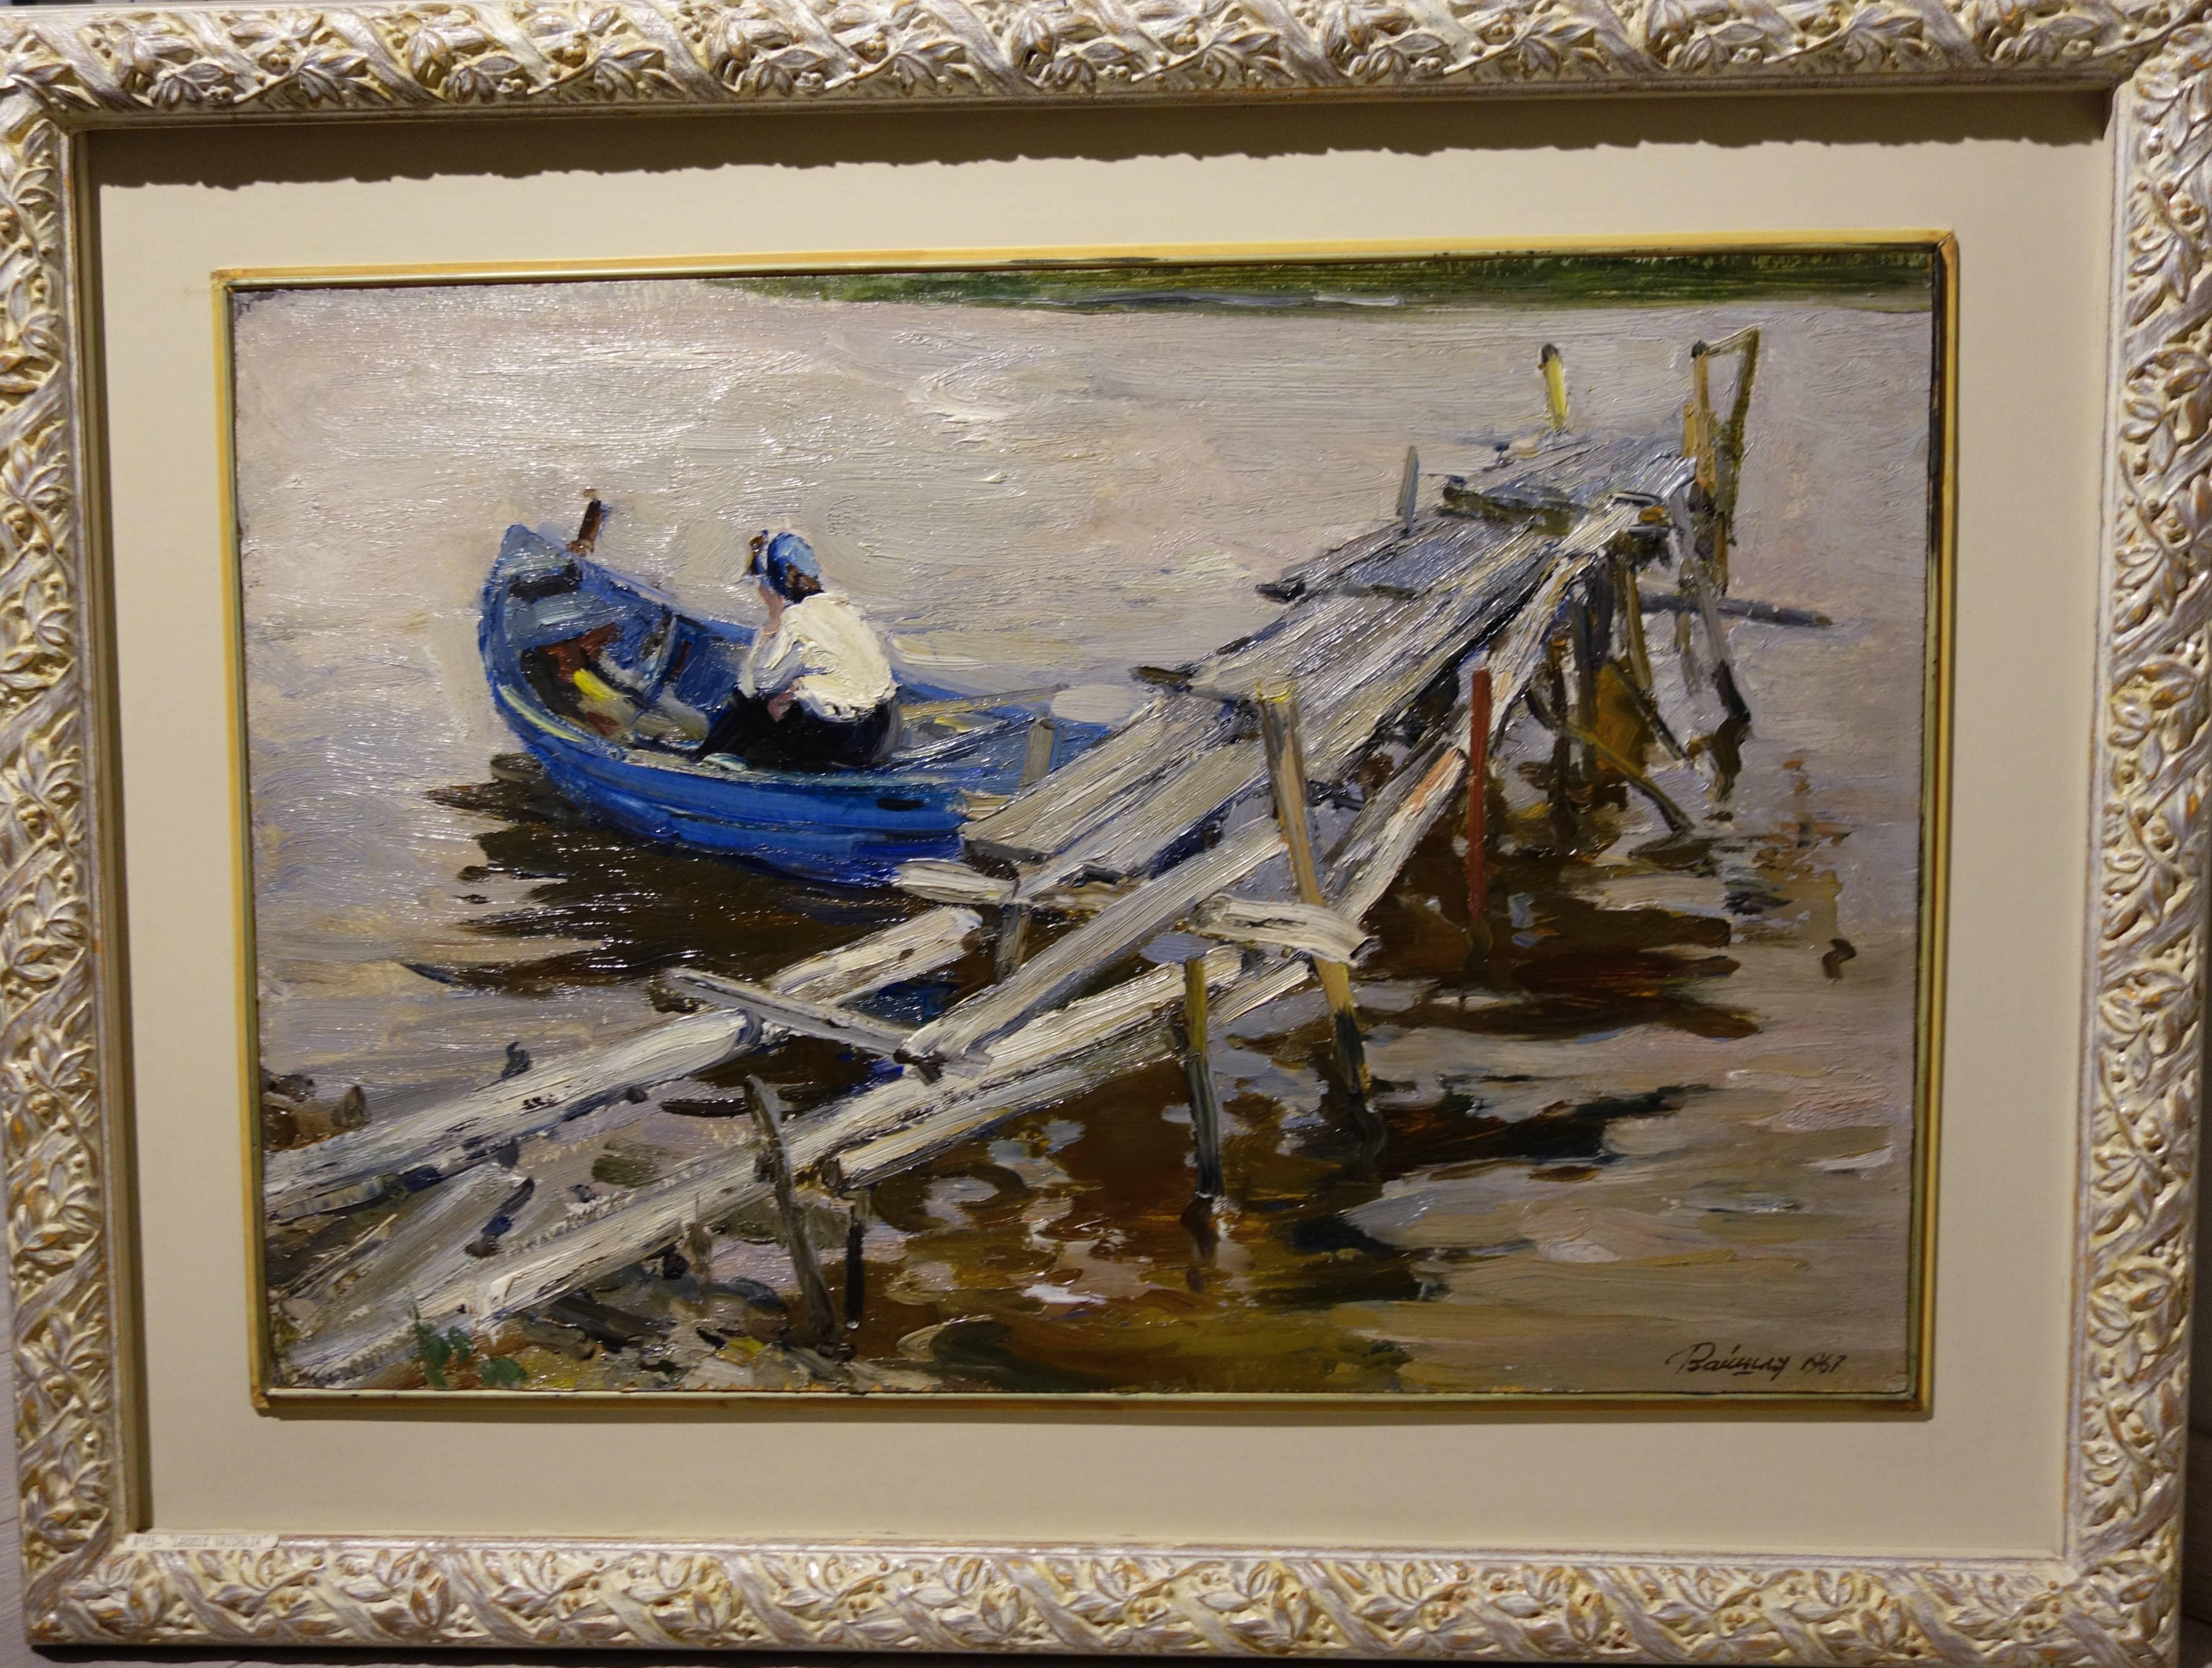 Pier on the lake  Oil on wood   cm. 70 x 47  1967 - Painting by Leonid VAICHILIA